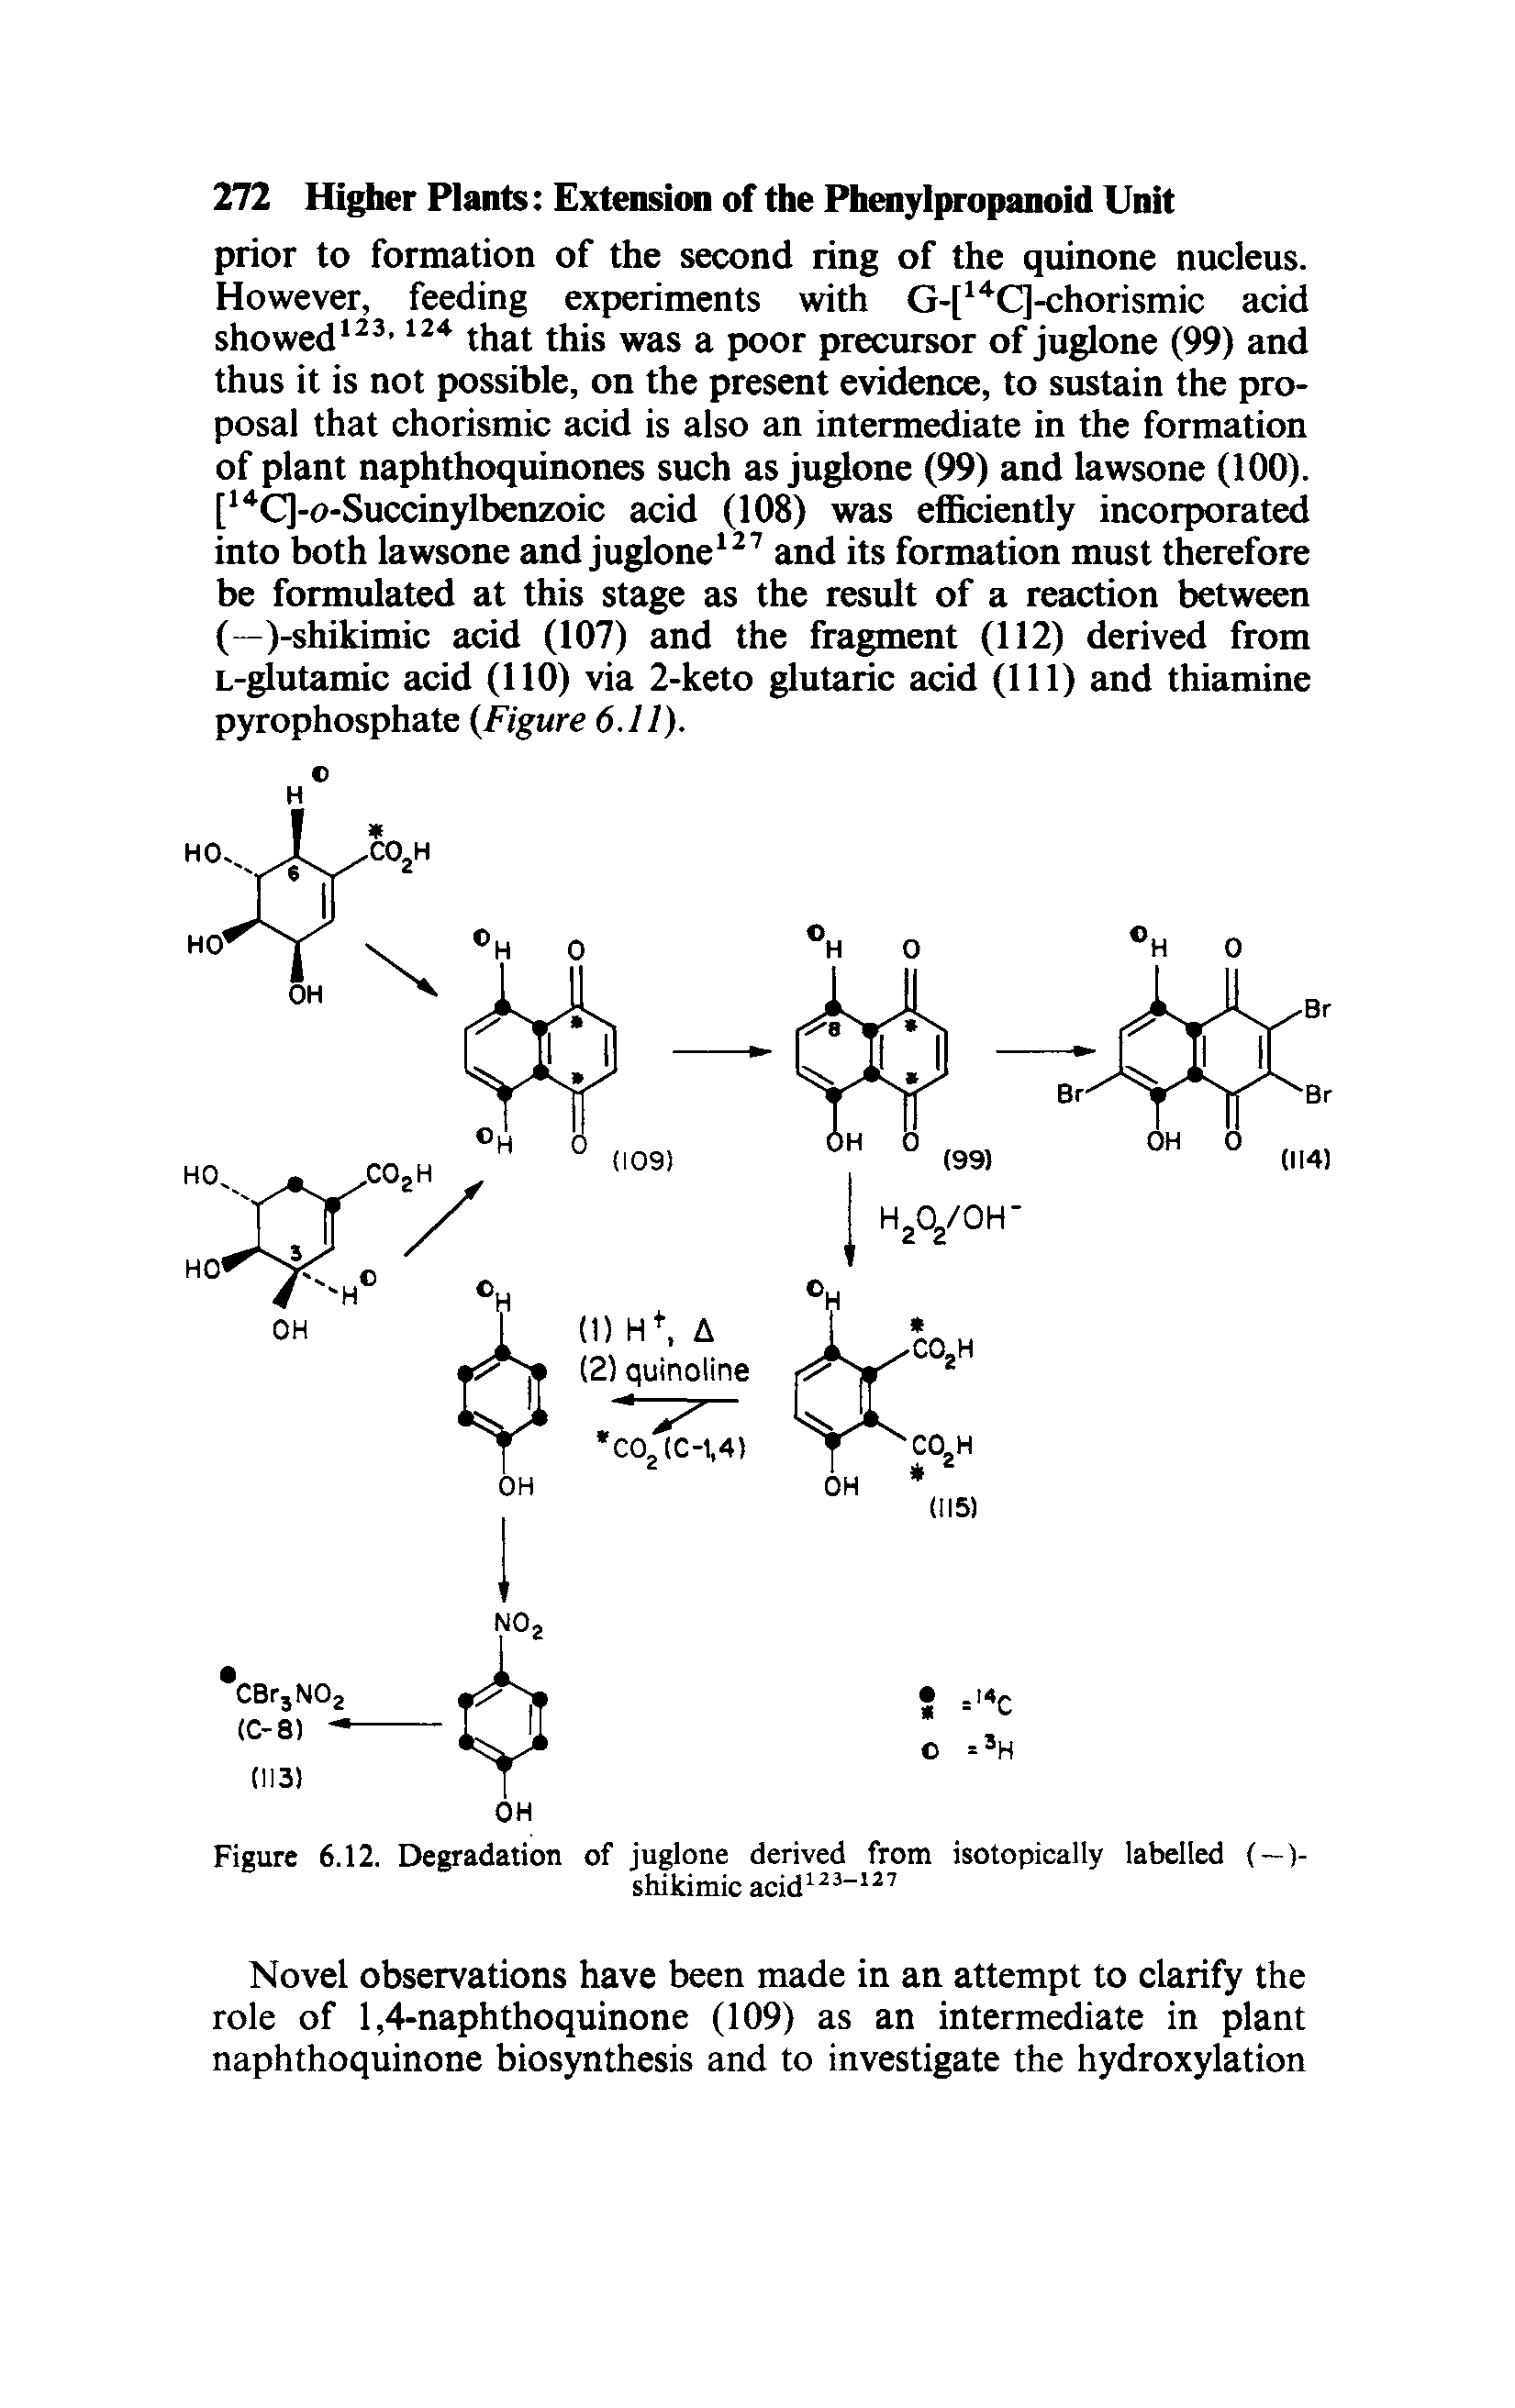 Figure 6.12. Degradation of juglone derived from isotopically labelled (—)-...